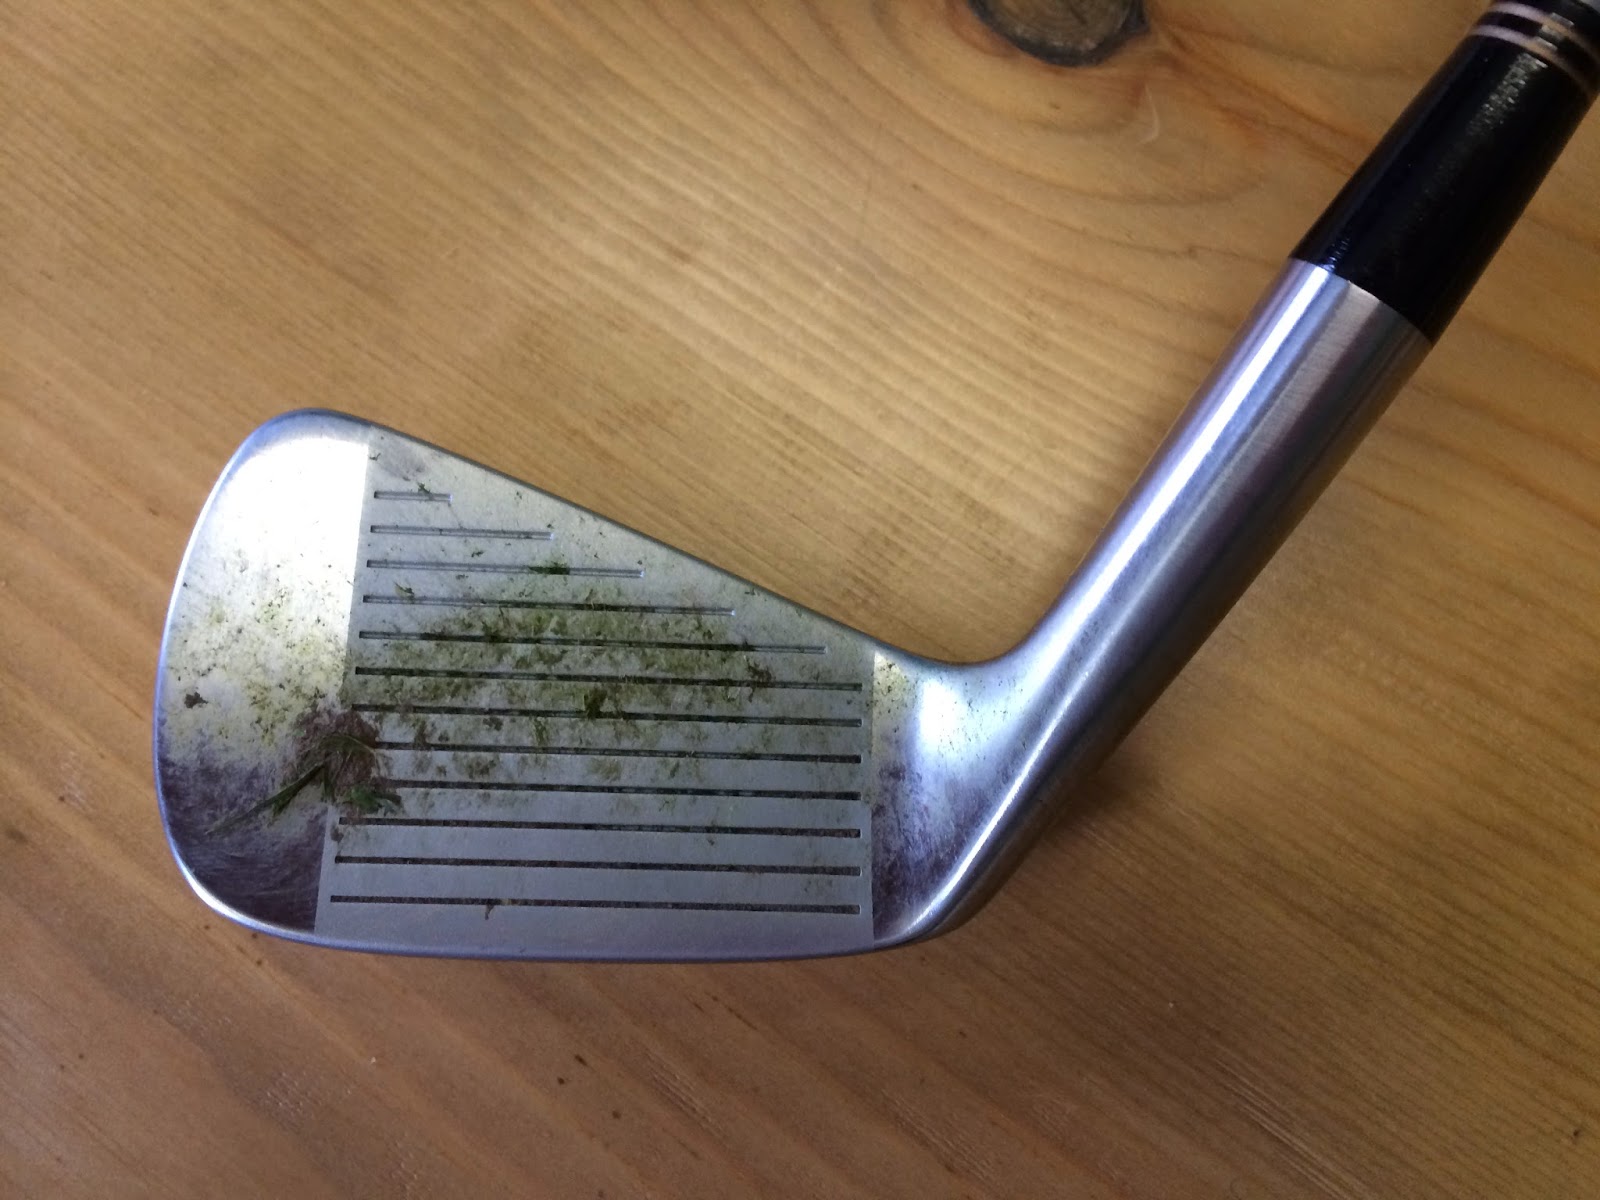 We asked 500 golfers how often they clean their golf clubs...